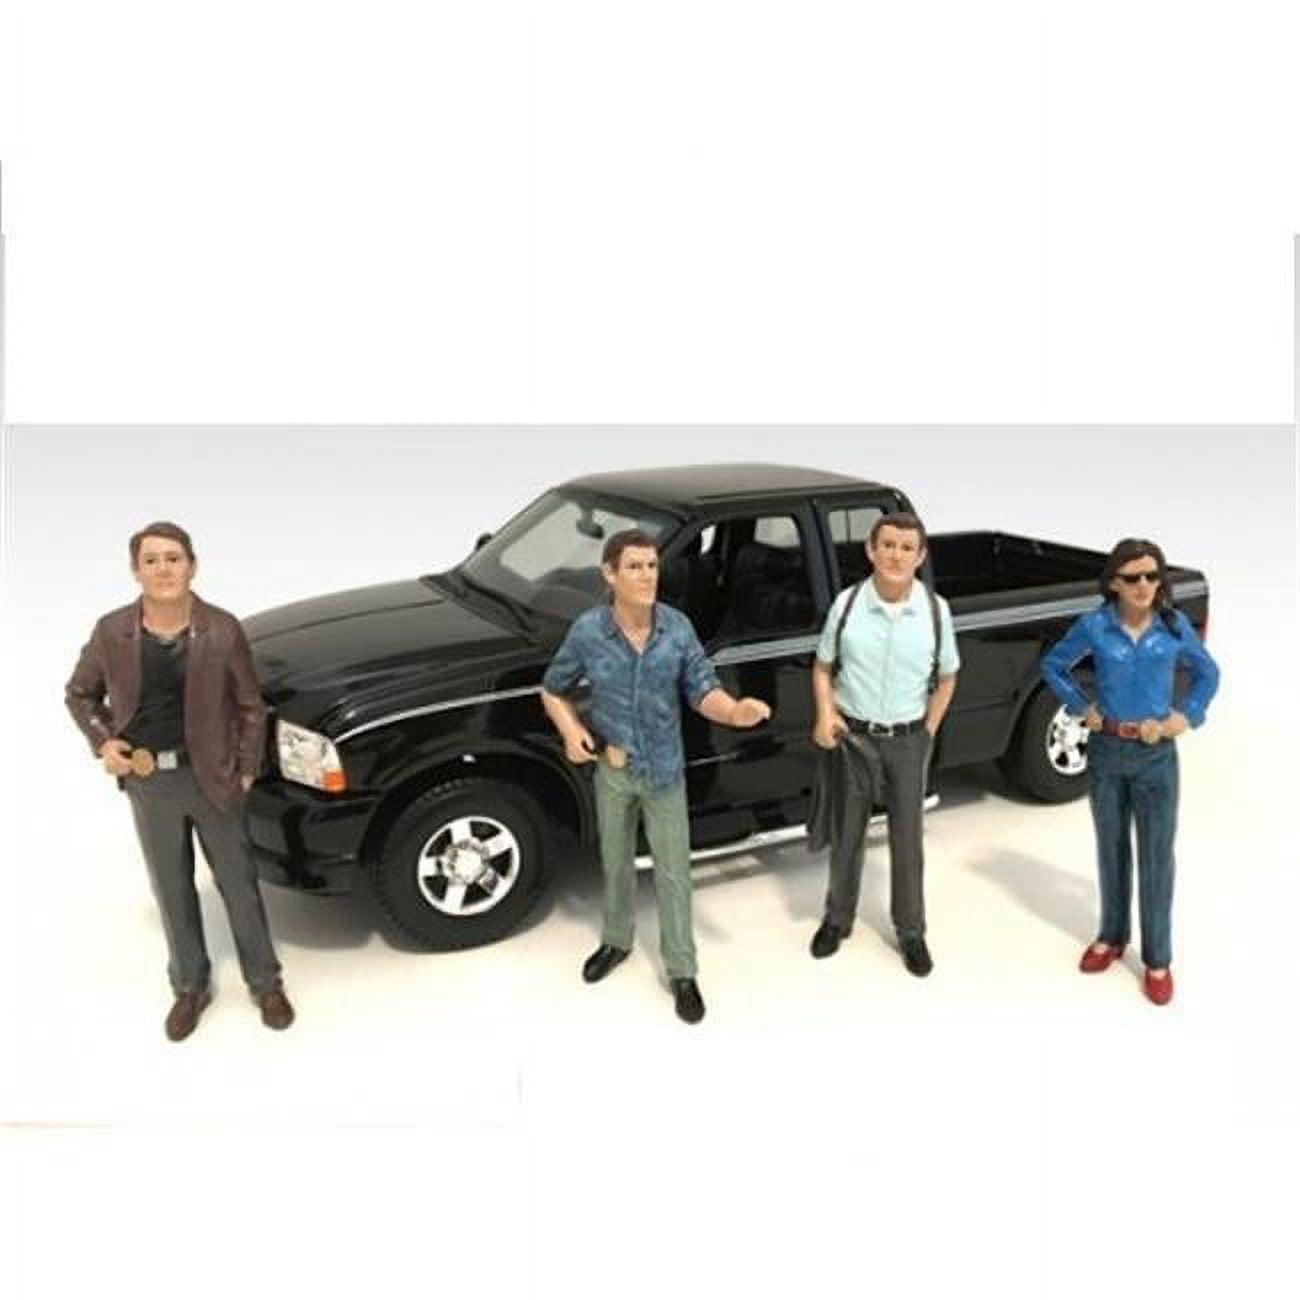 The Detective Figure Set For 1-24 Scale Models, 4 Piece